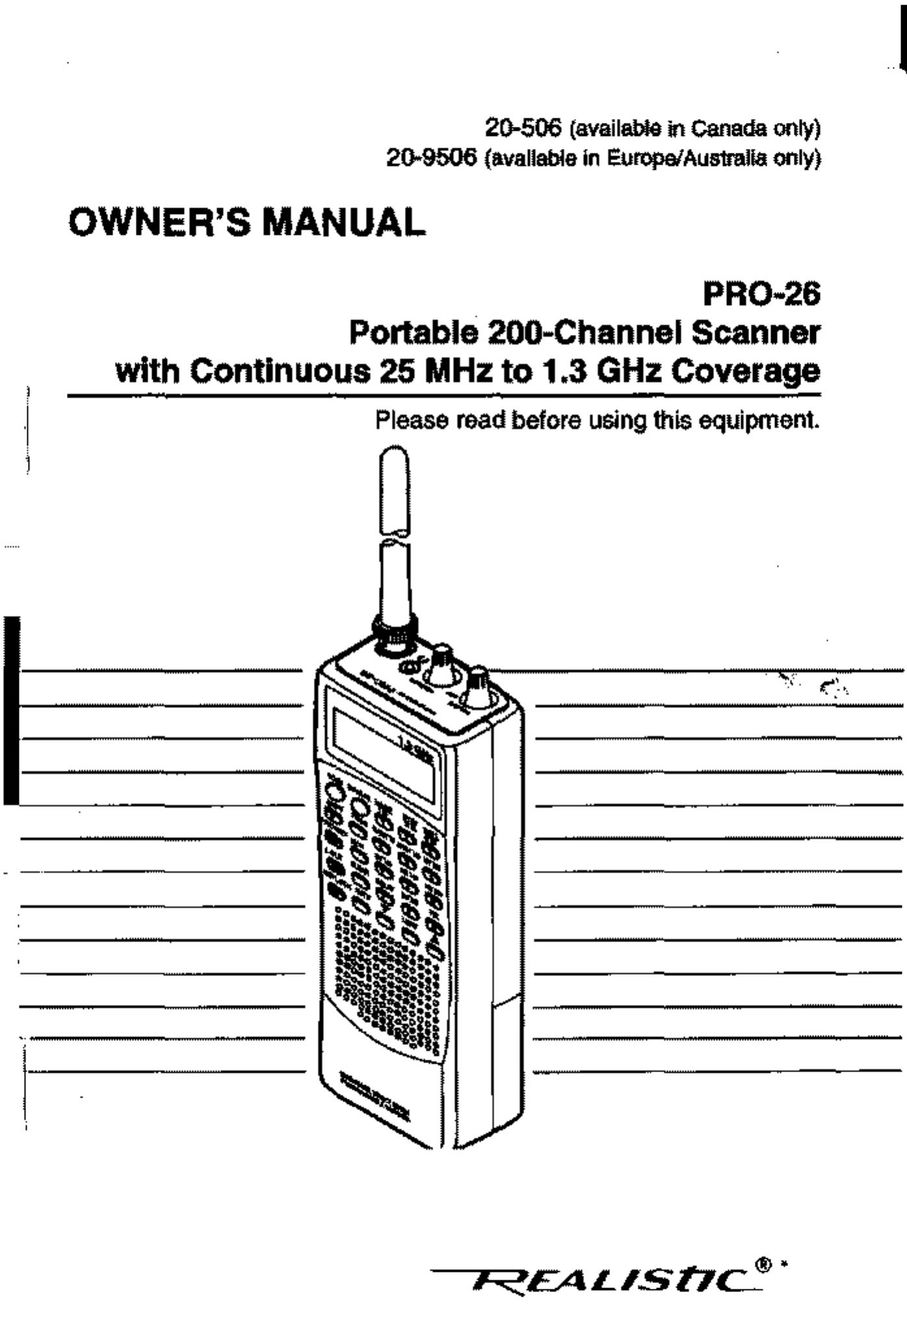 Realistic PRO-26 Scanner User Manual